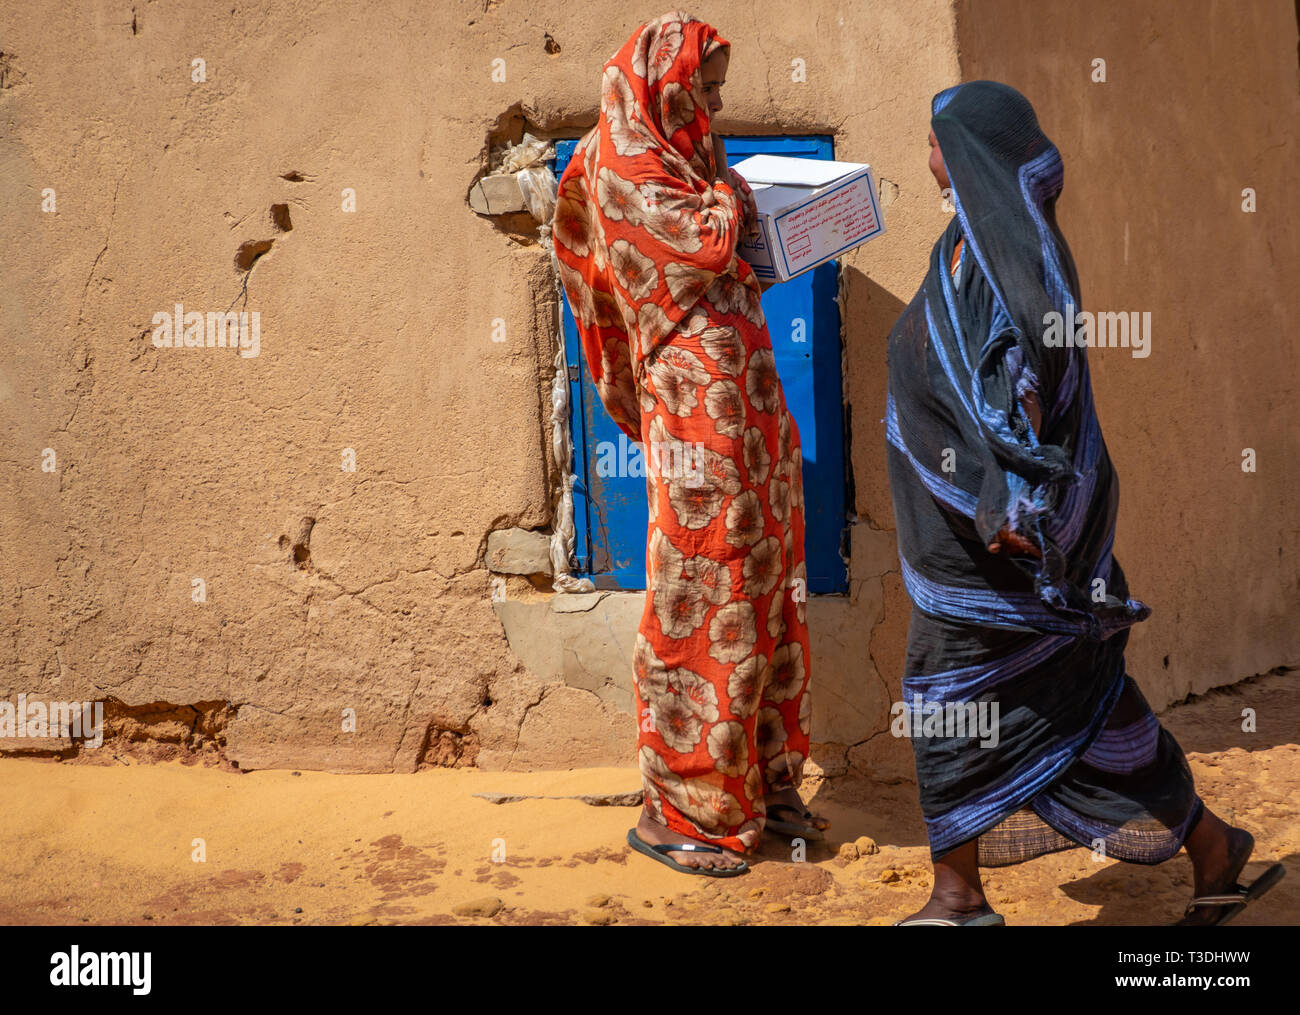 Kerma, Sudan, February 10., 2019: Two Sudanese women, one in a blue dress, one in a red dress, talking in front of a mud hut in a desert village. Stock Photo